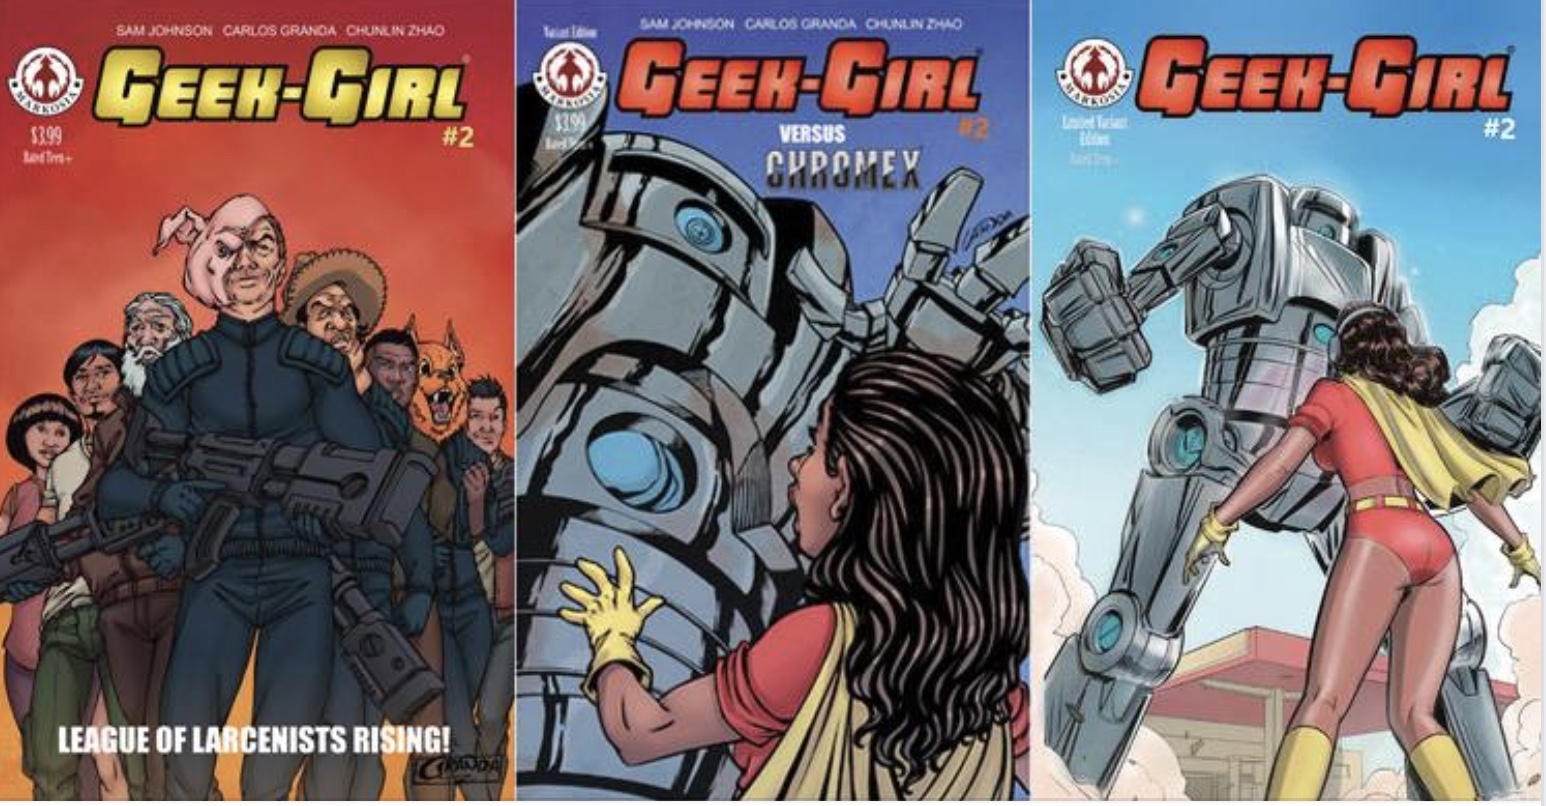 Mr. ANderSiN reviews Geek Girl #1 with The 7 Questions of Review in 7 Minutes